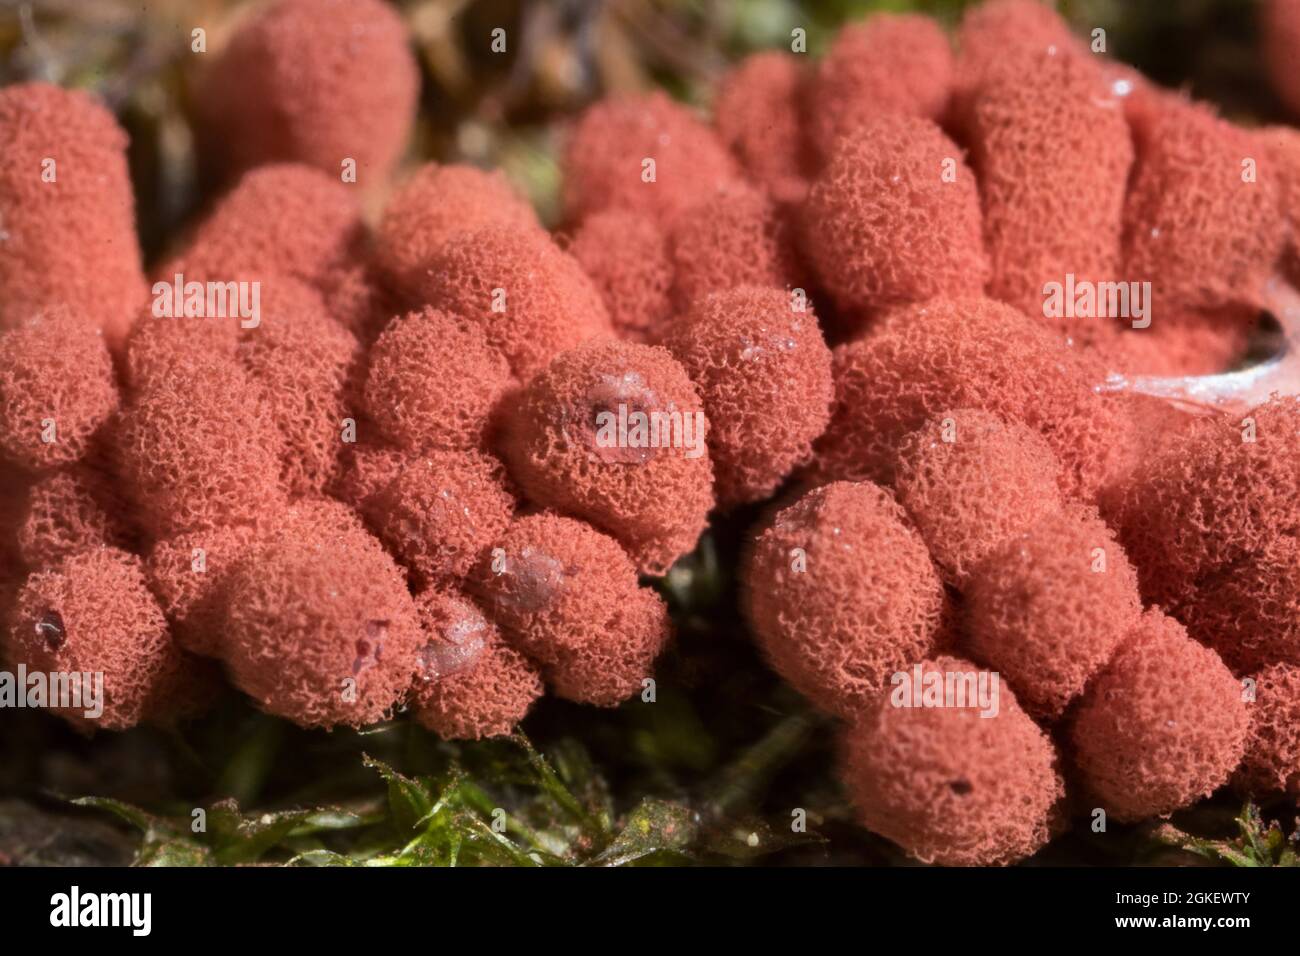 Carnival candy slime mold (Arcyria denudata) Stock Photo